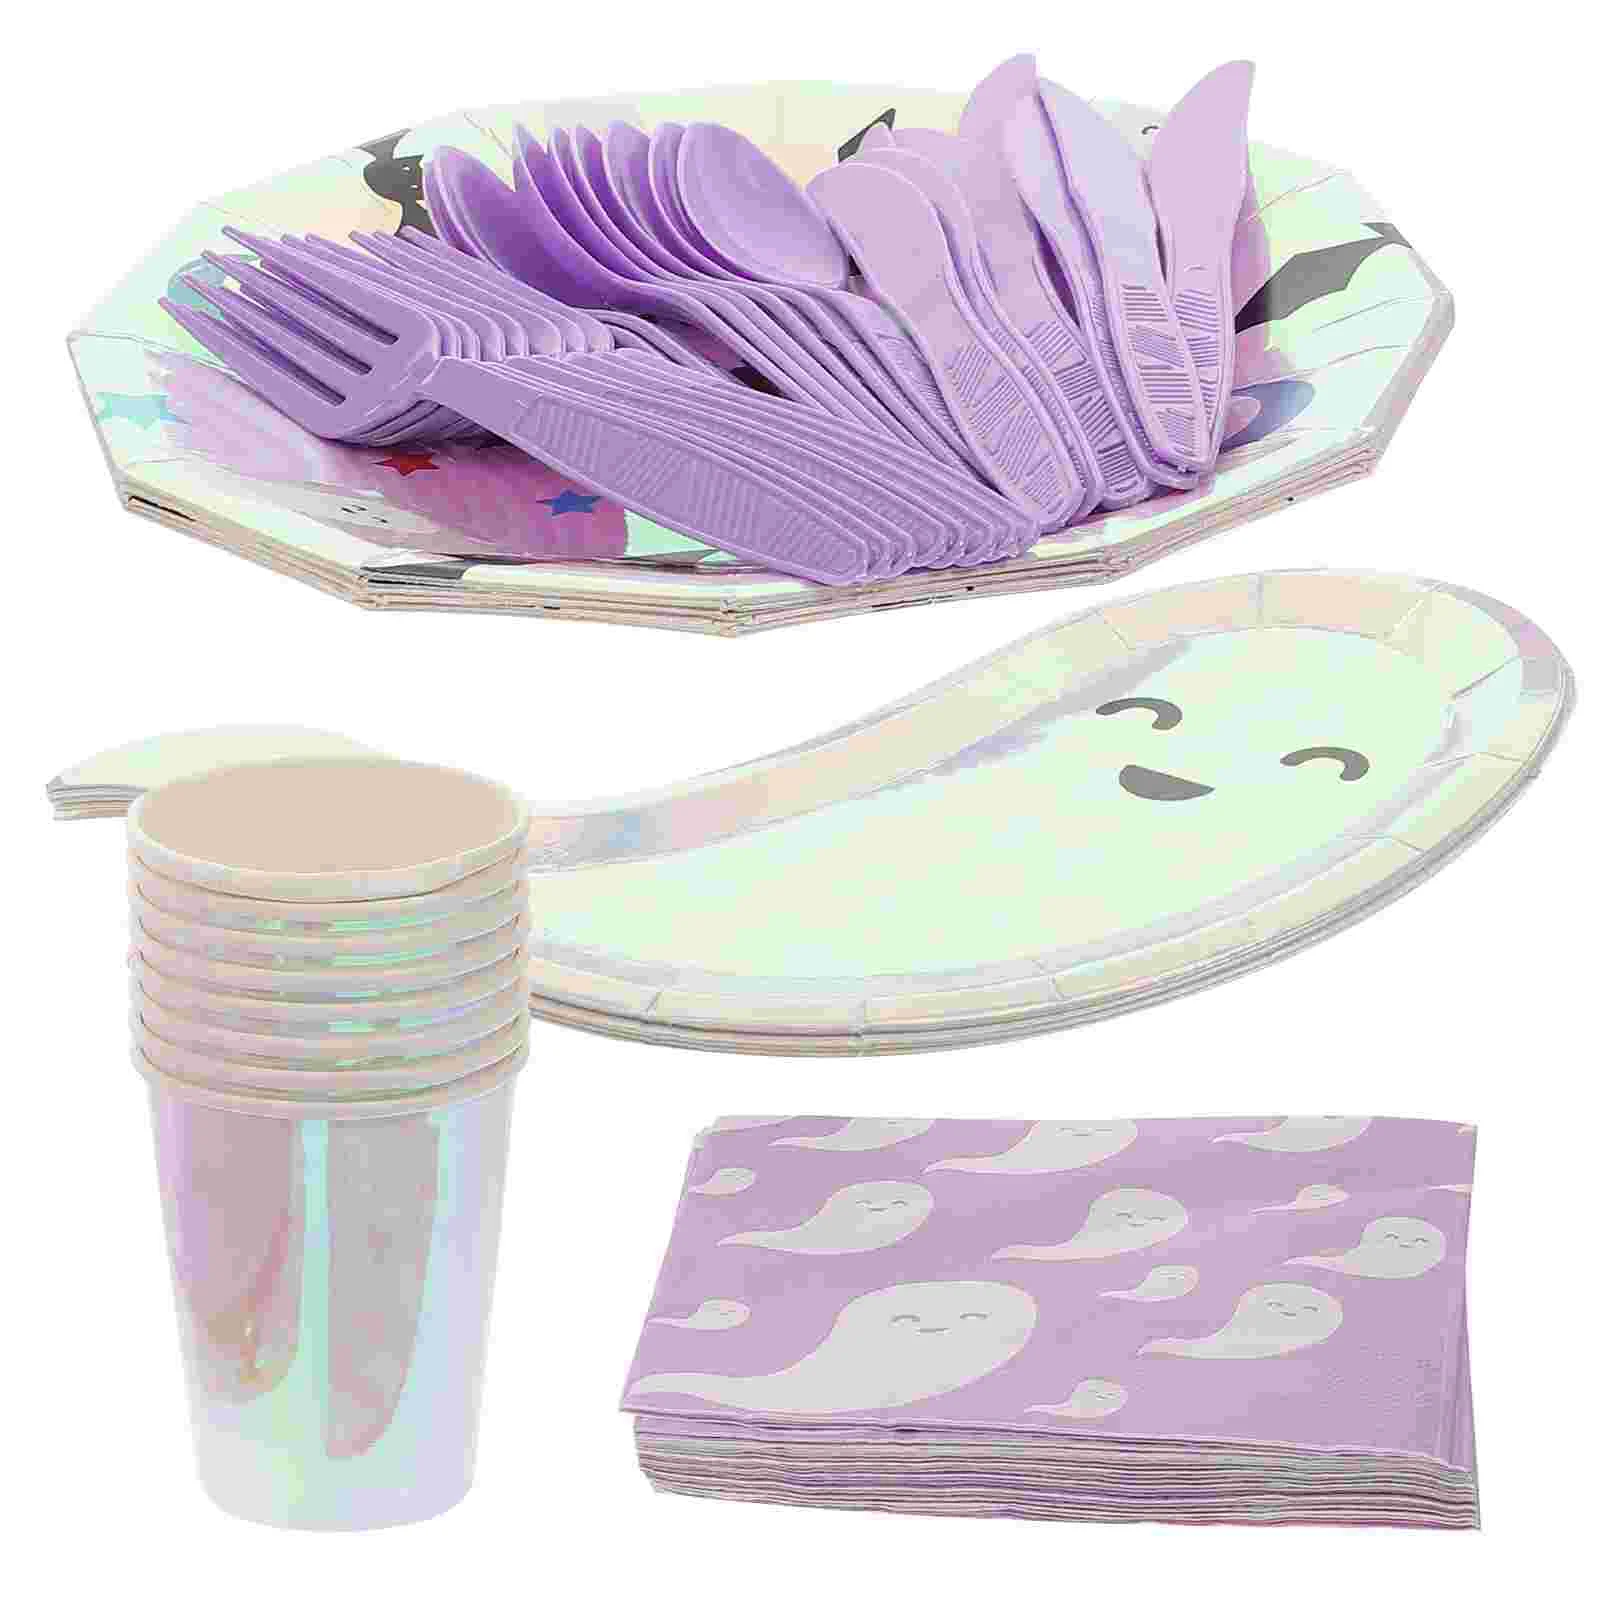 

Party Paper Set Plates Tableware Supplies Napkins Decorations Plate Disposable Cup Dinnerware Cups Ghost Silverware Dinner